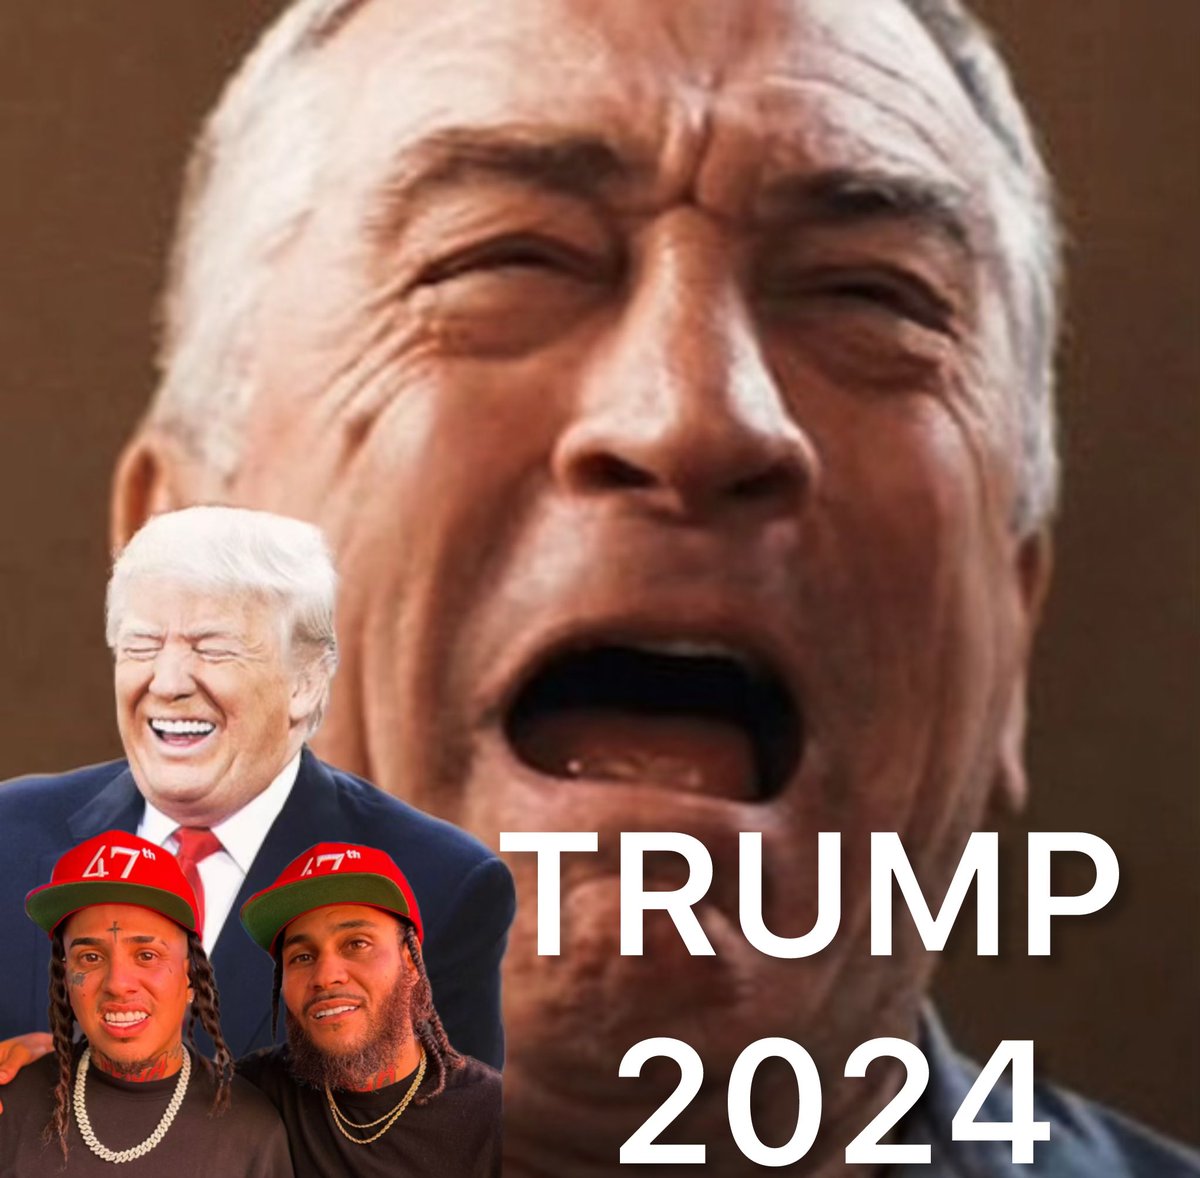 RT If You’re Voting Trump 2024